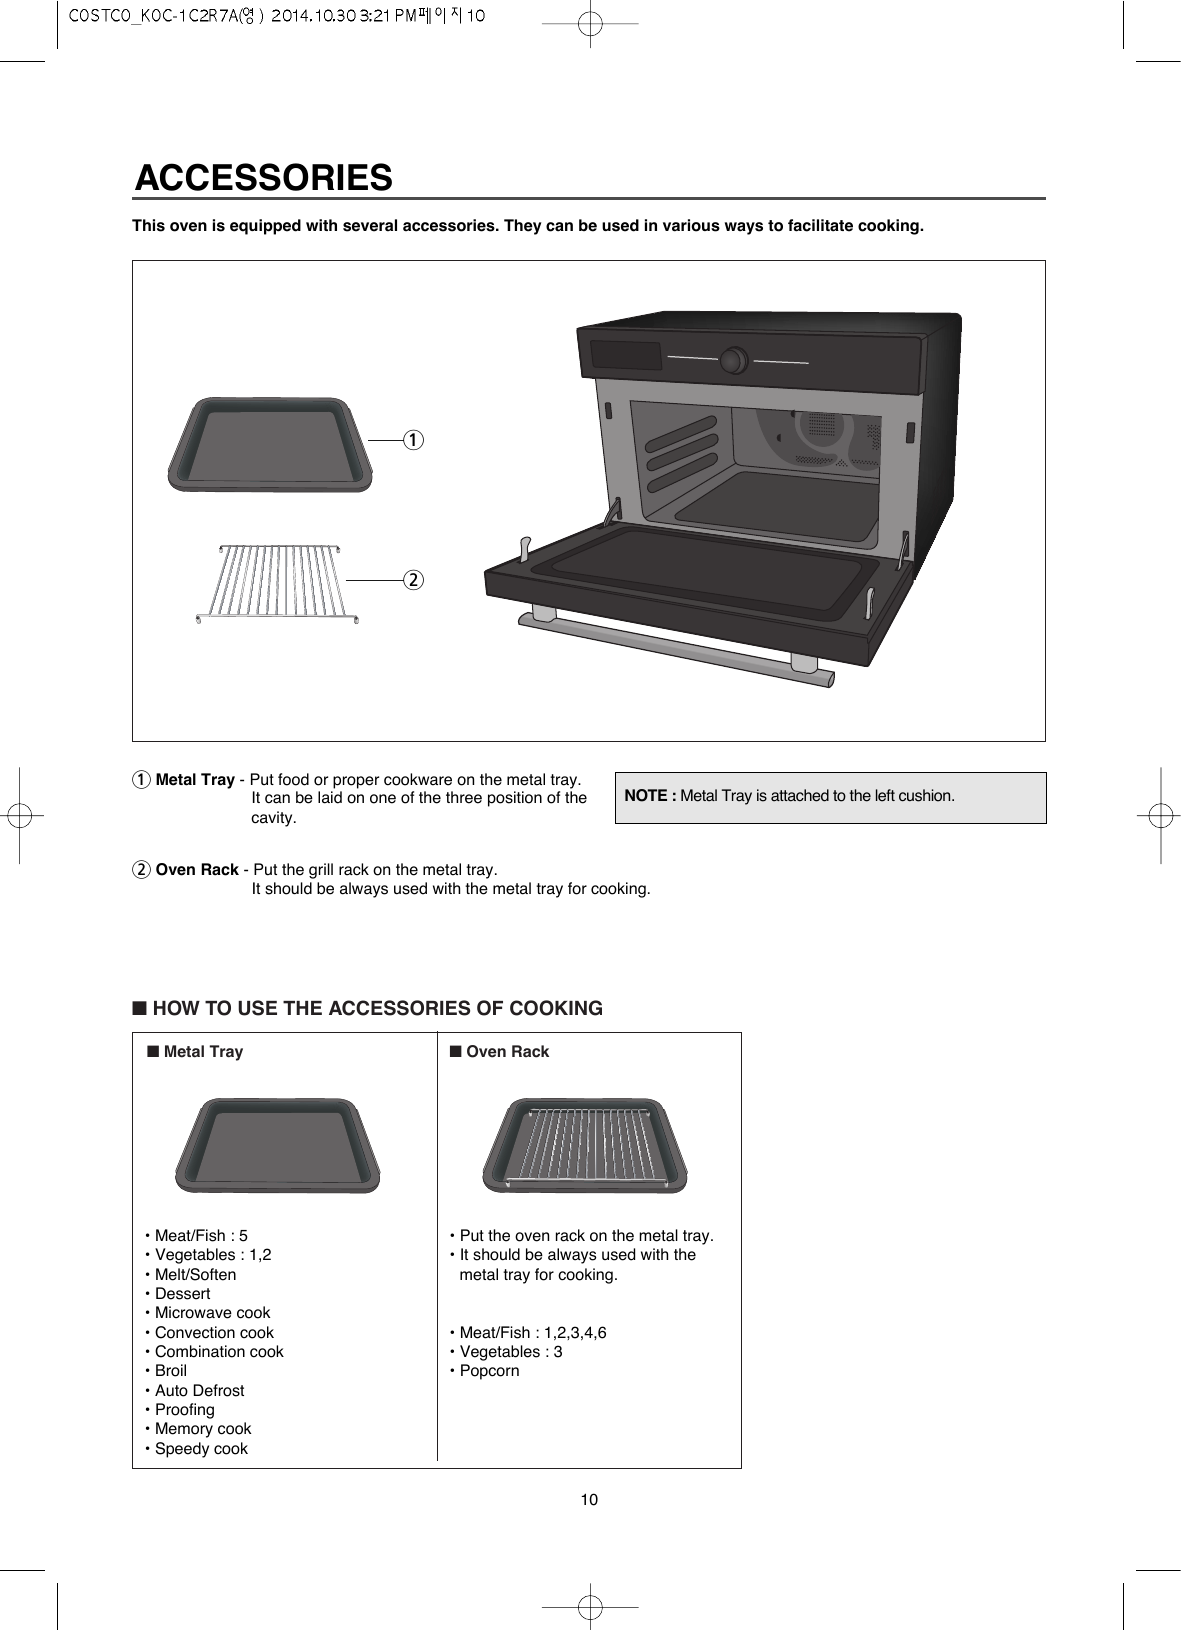 10This oven is equipped with several accessories. They can be used in various ways to facilitate cooking.1Metal Tray - Put food or proper cookware on the metal tray.It can be laid on one of the three position of thecavity.2Oven Rack - Put the grill rack on the metal tray.It should be always used with the metal tray for cooking. ■HOW TO USE THE ACCESSORIES OF COOKING■Metal Tray ■Oven RackNOTE : Metal Tray is attached to the left cushion.12• Meat/Fish : 5• Vegetables : 1,2• Melt/Soften• Dessert• Microwave cook• Convection cook• Combination cook• Broil• Auto Defrost• Proofing• Memory cook• Speedy cook• Put the oven rack on the metal tray.• It should be always used with themetal tray for cooking. • Meat/Fish : 1,2,3,4,6• Vegetables : 3• PopcornACCESSORIES